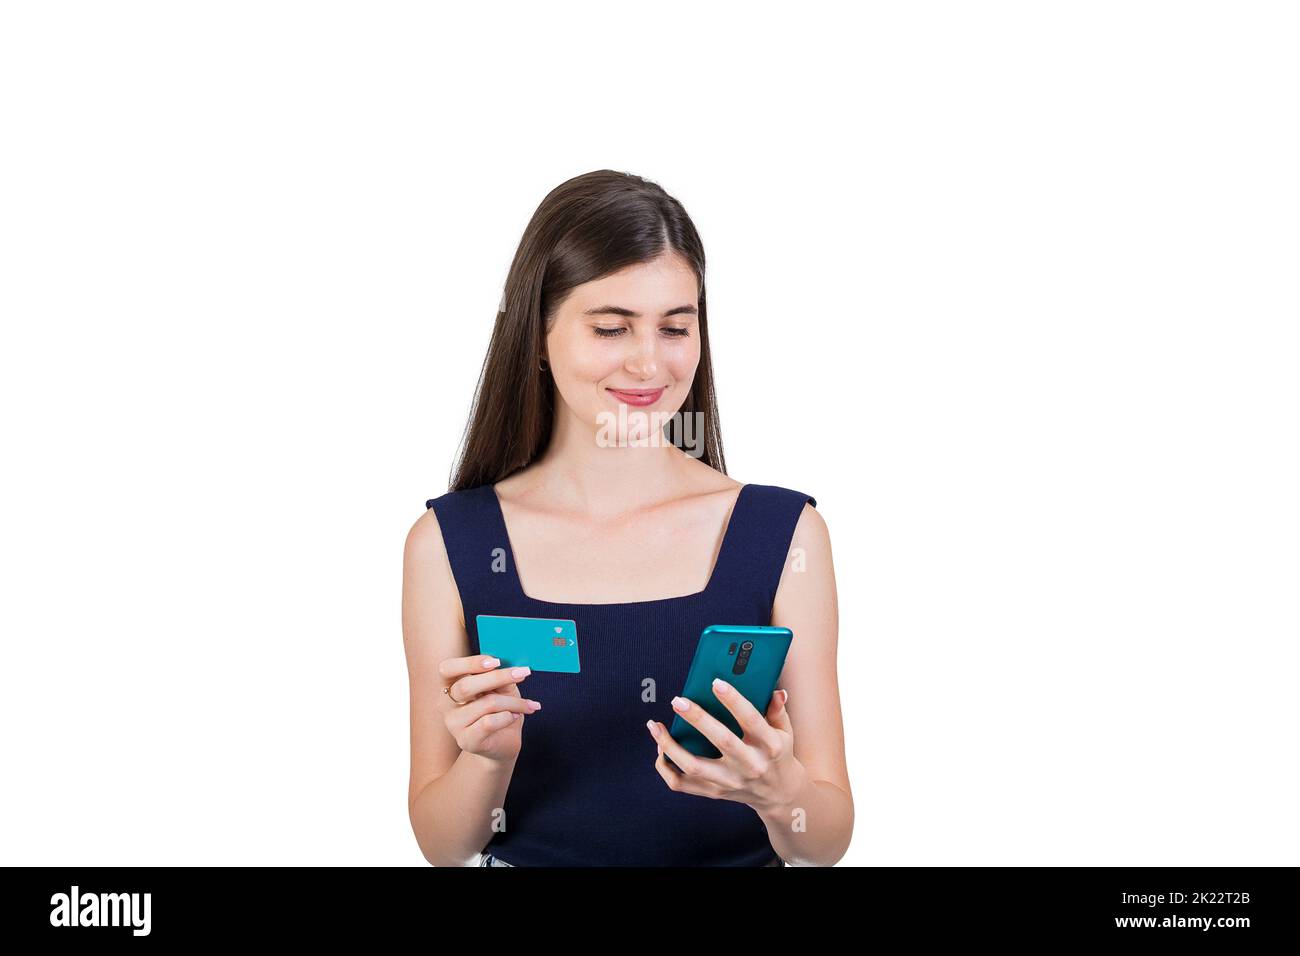 Cheerful young woman using her smartphone while holding a credit card in other hand, isolated on white background with copy space. Internet mobile ban Stock Photo